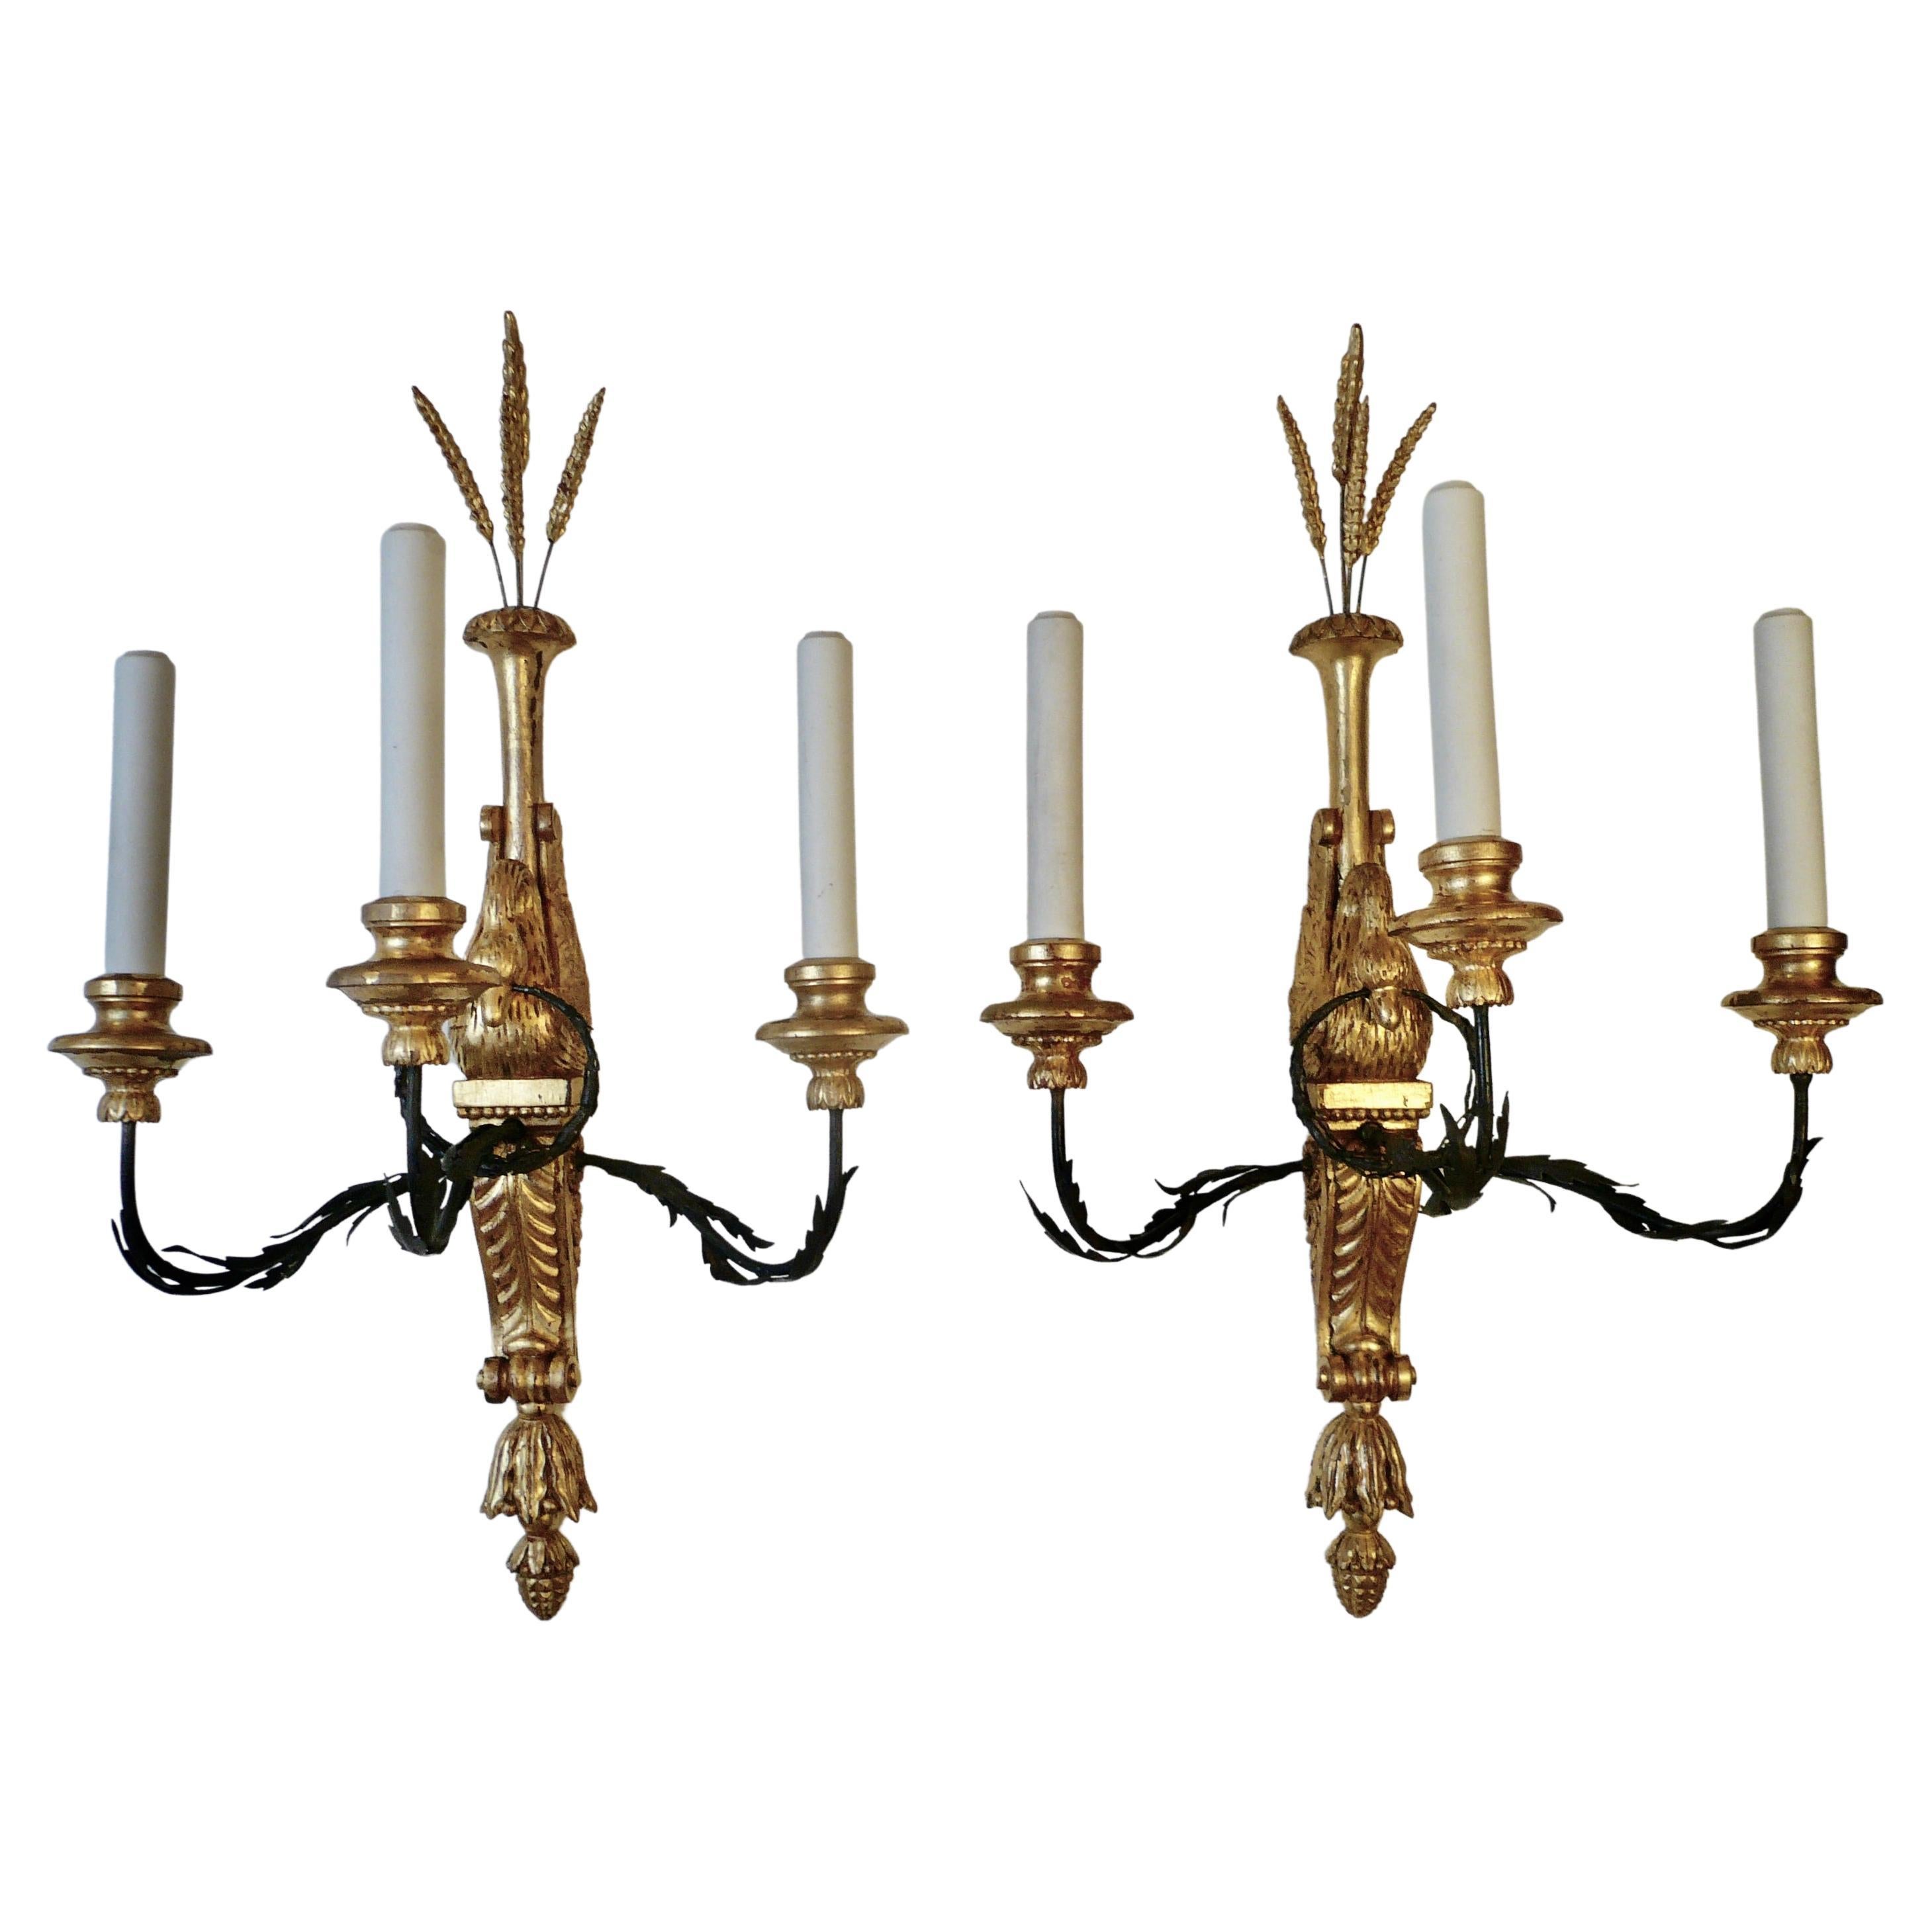 Three Pairs of Signed E. F. Caldwell Carved Giltwood and Iron Swan Form Sconces